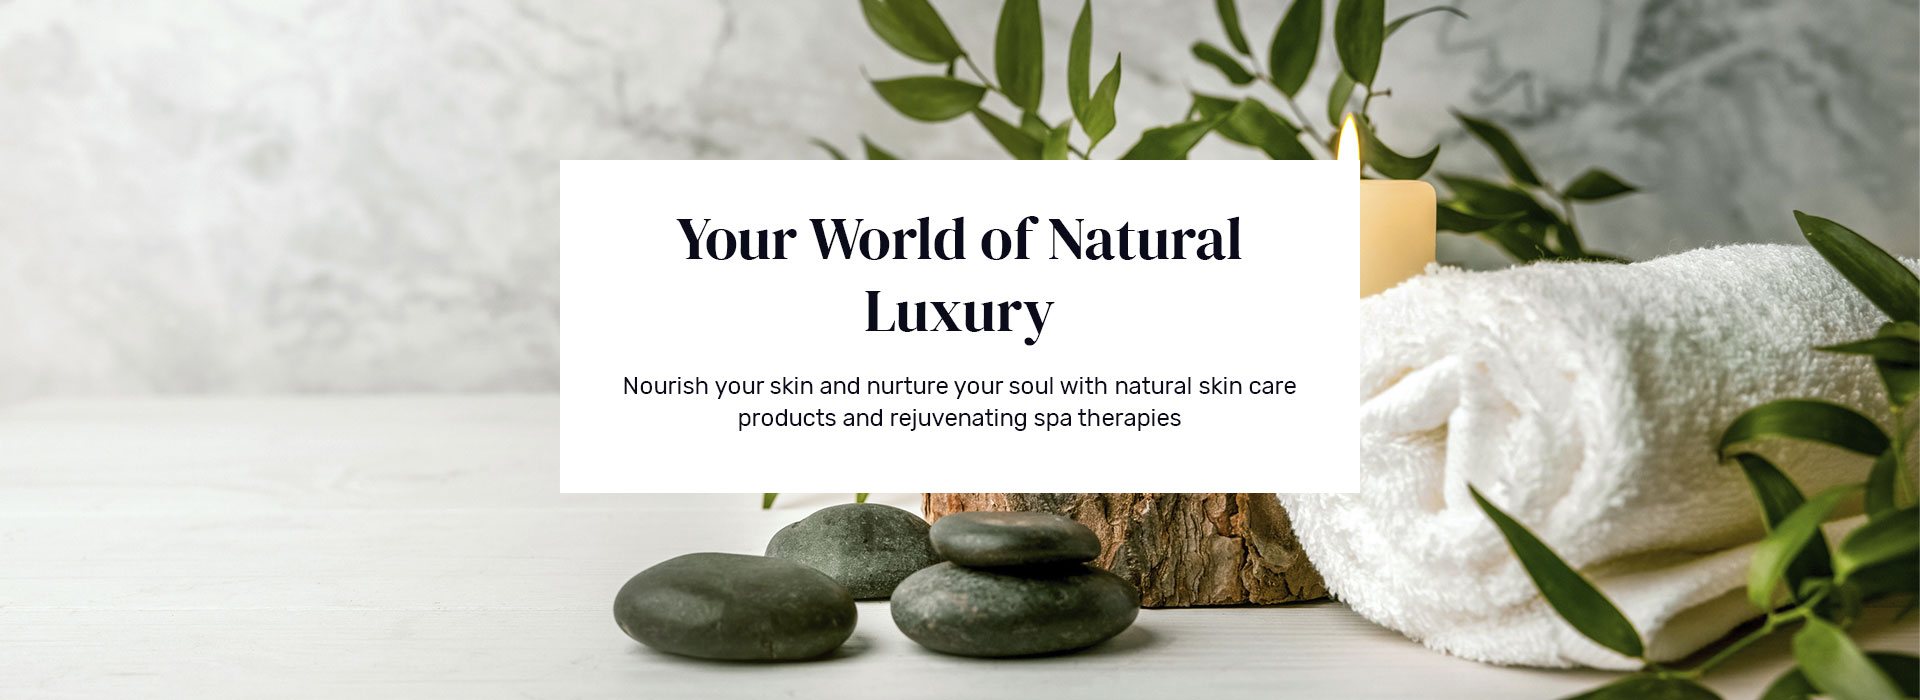 Nourish your skin and nurture your soul with natural skin care products and rejuvenating spa therapies